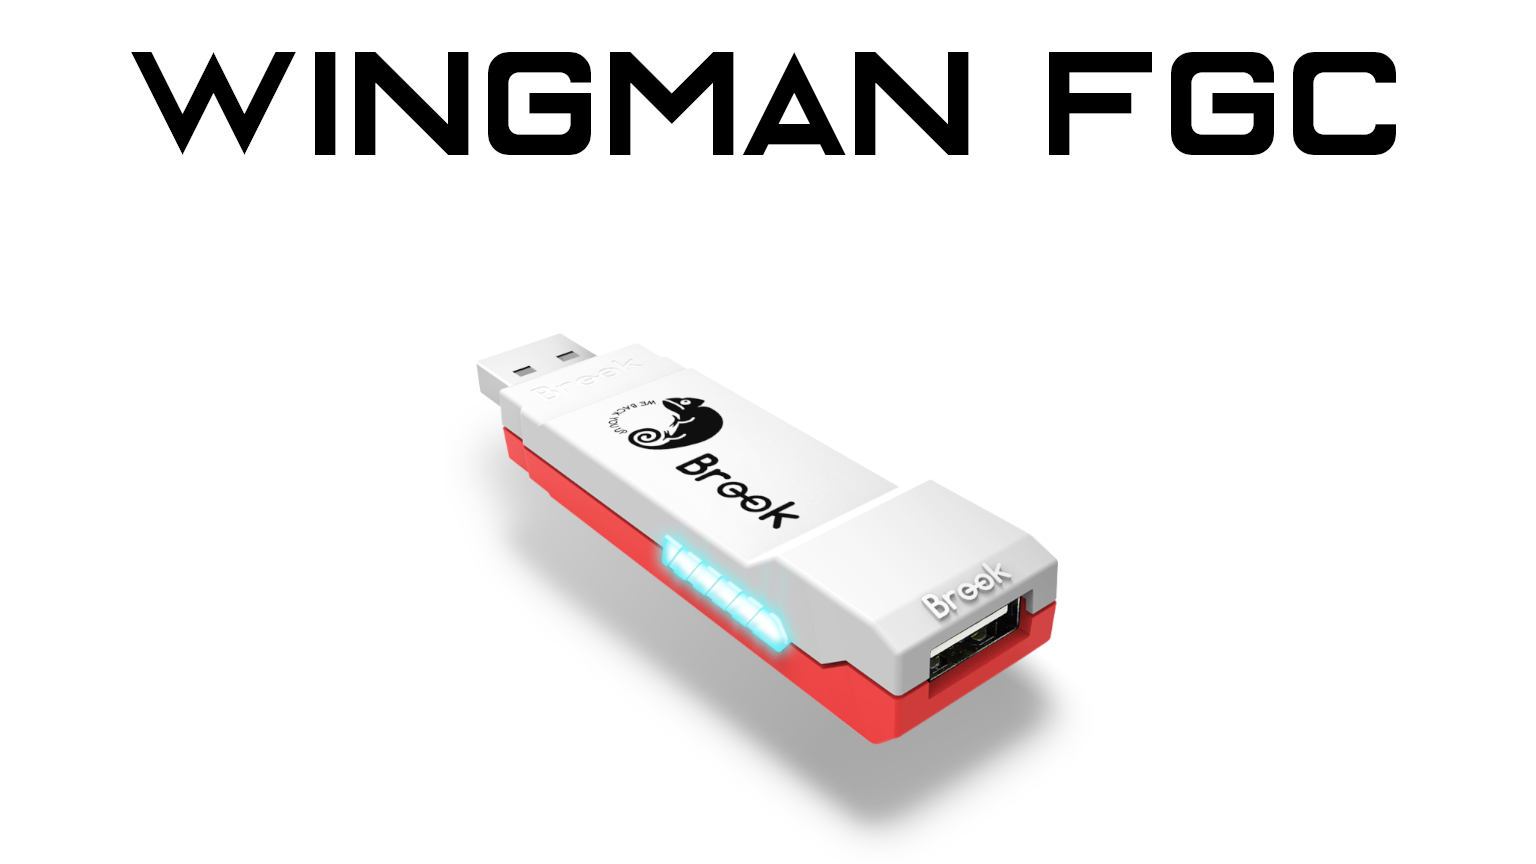 Wingman FGC now available!